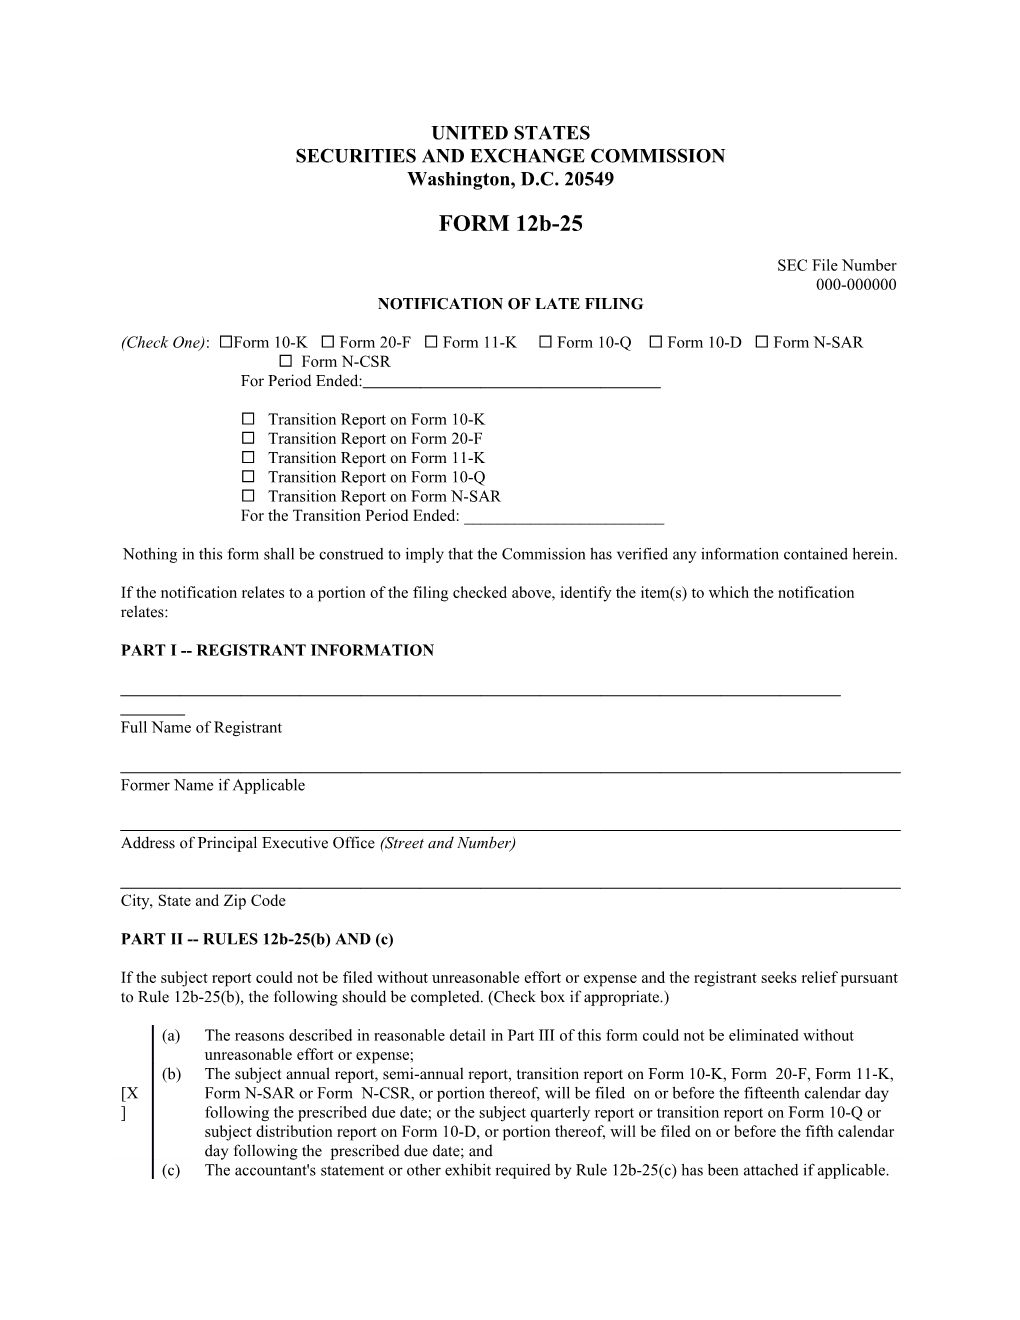 Form 12B-25 Late Filing Notice for 12/30 Form 10-Q (00023841)